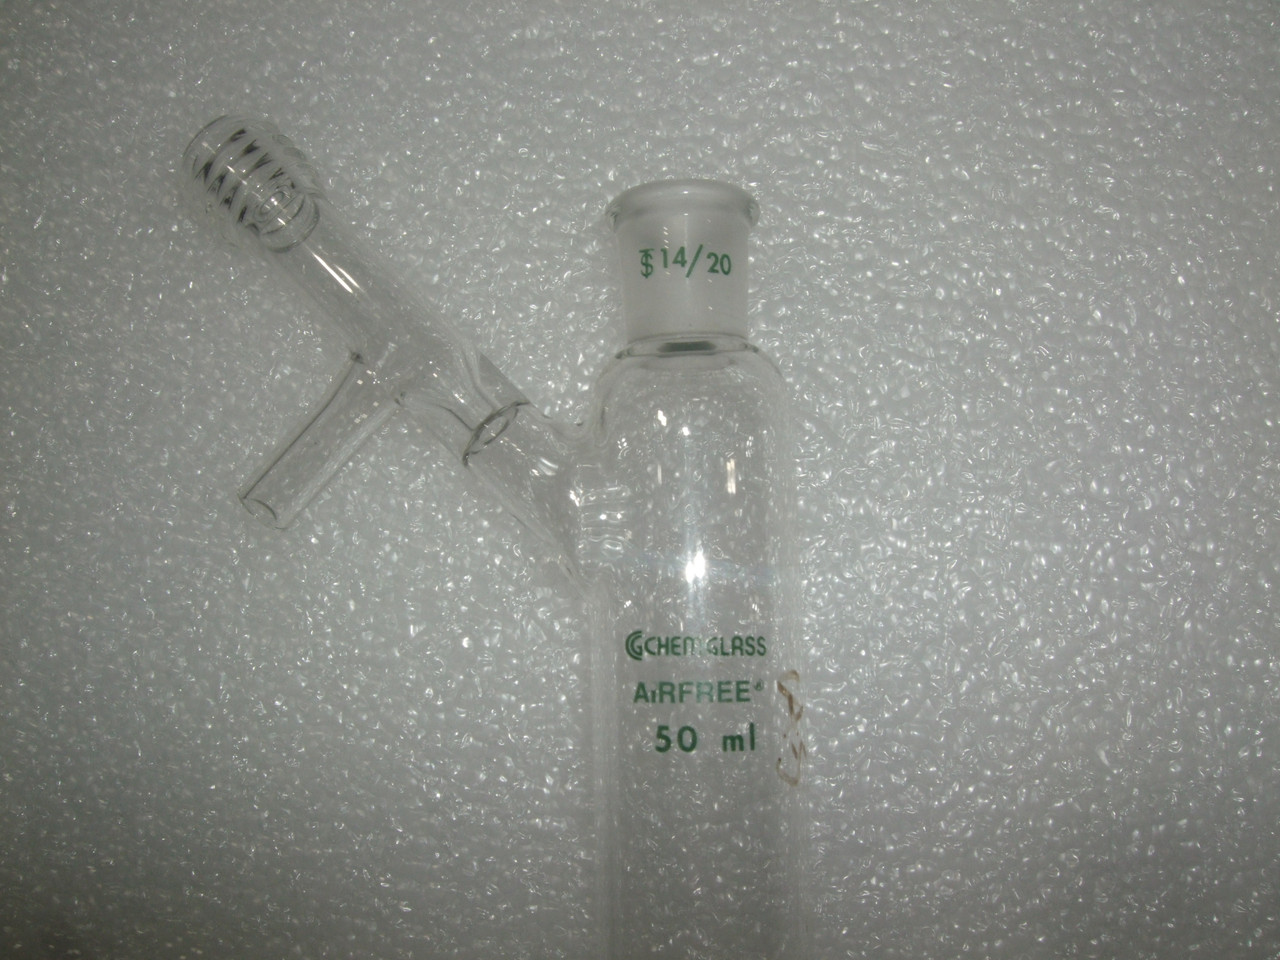 Chemglass AF-0537-A-11 50mL Tube, Reaction, Airfree, Schlenk, 14/20 Outer Joint, 0-4mm Valve